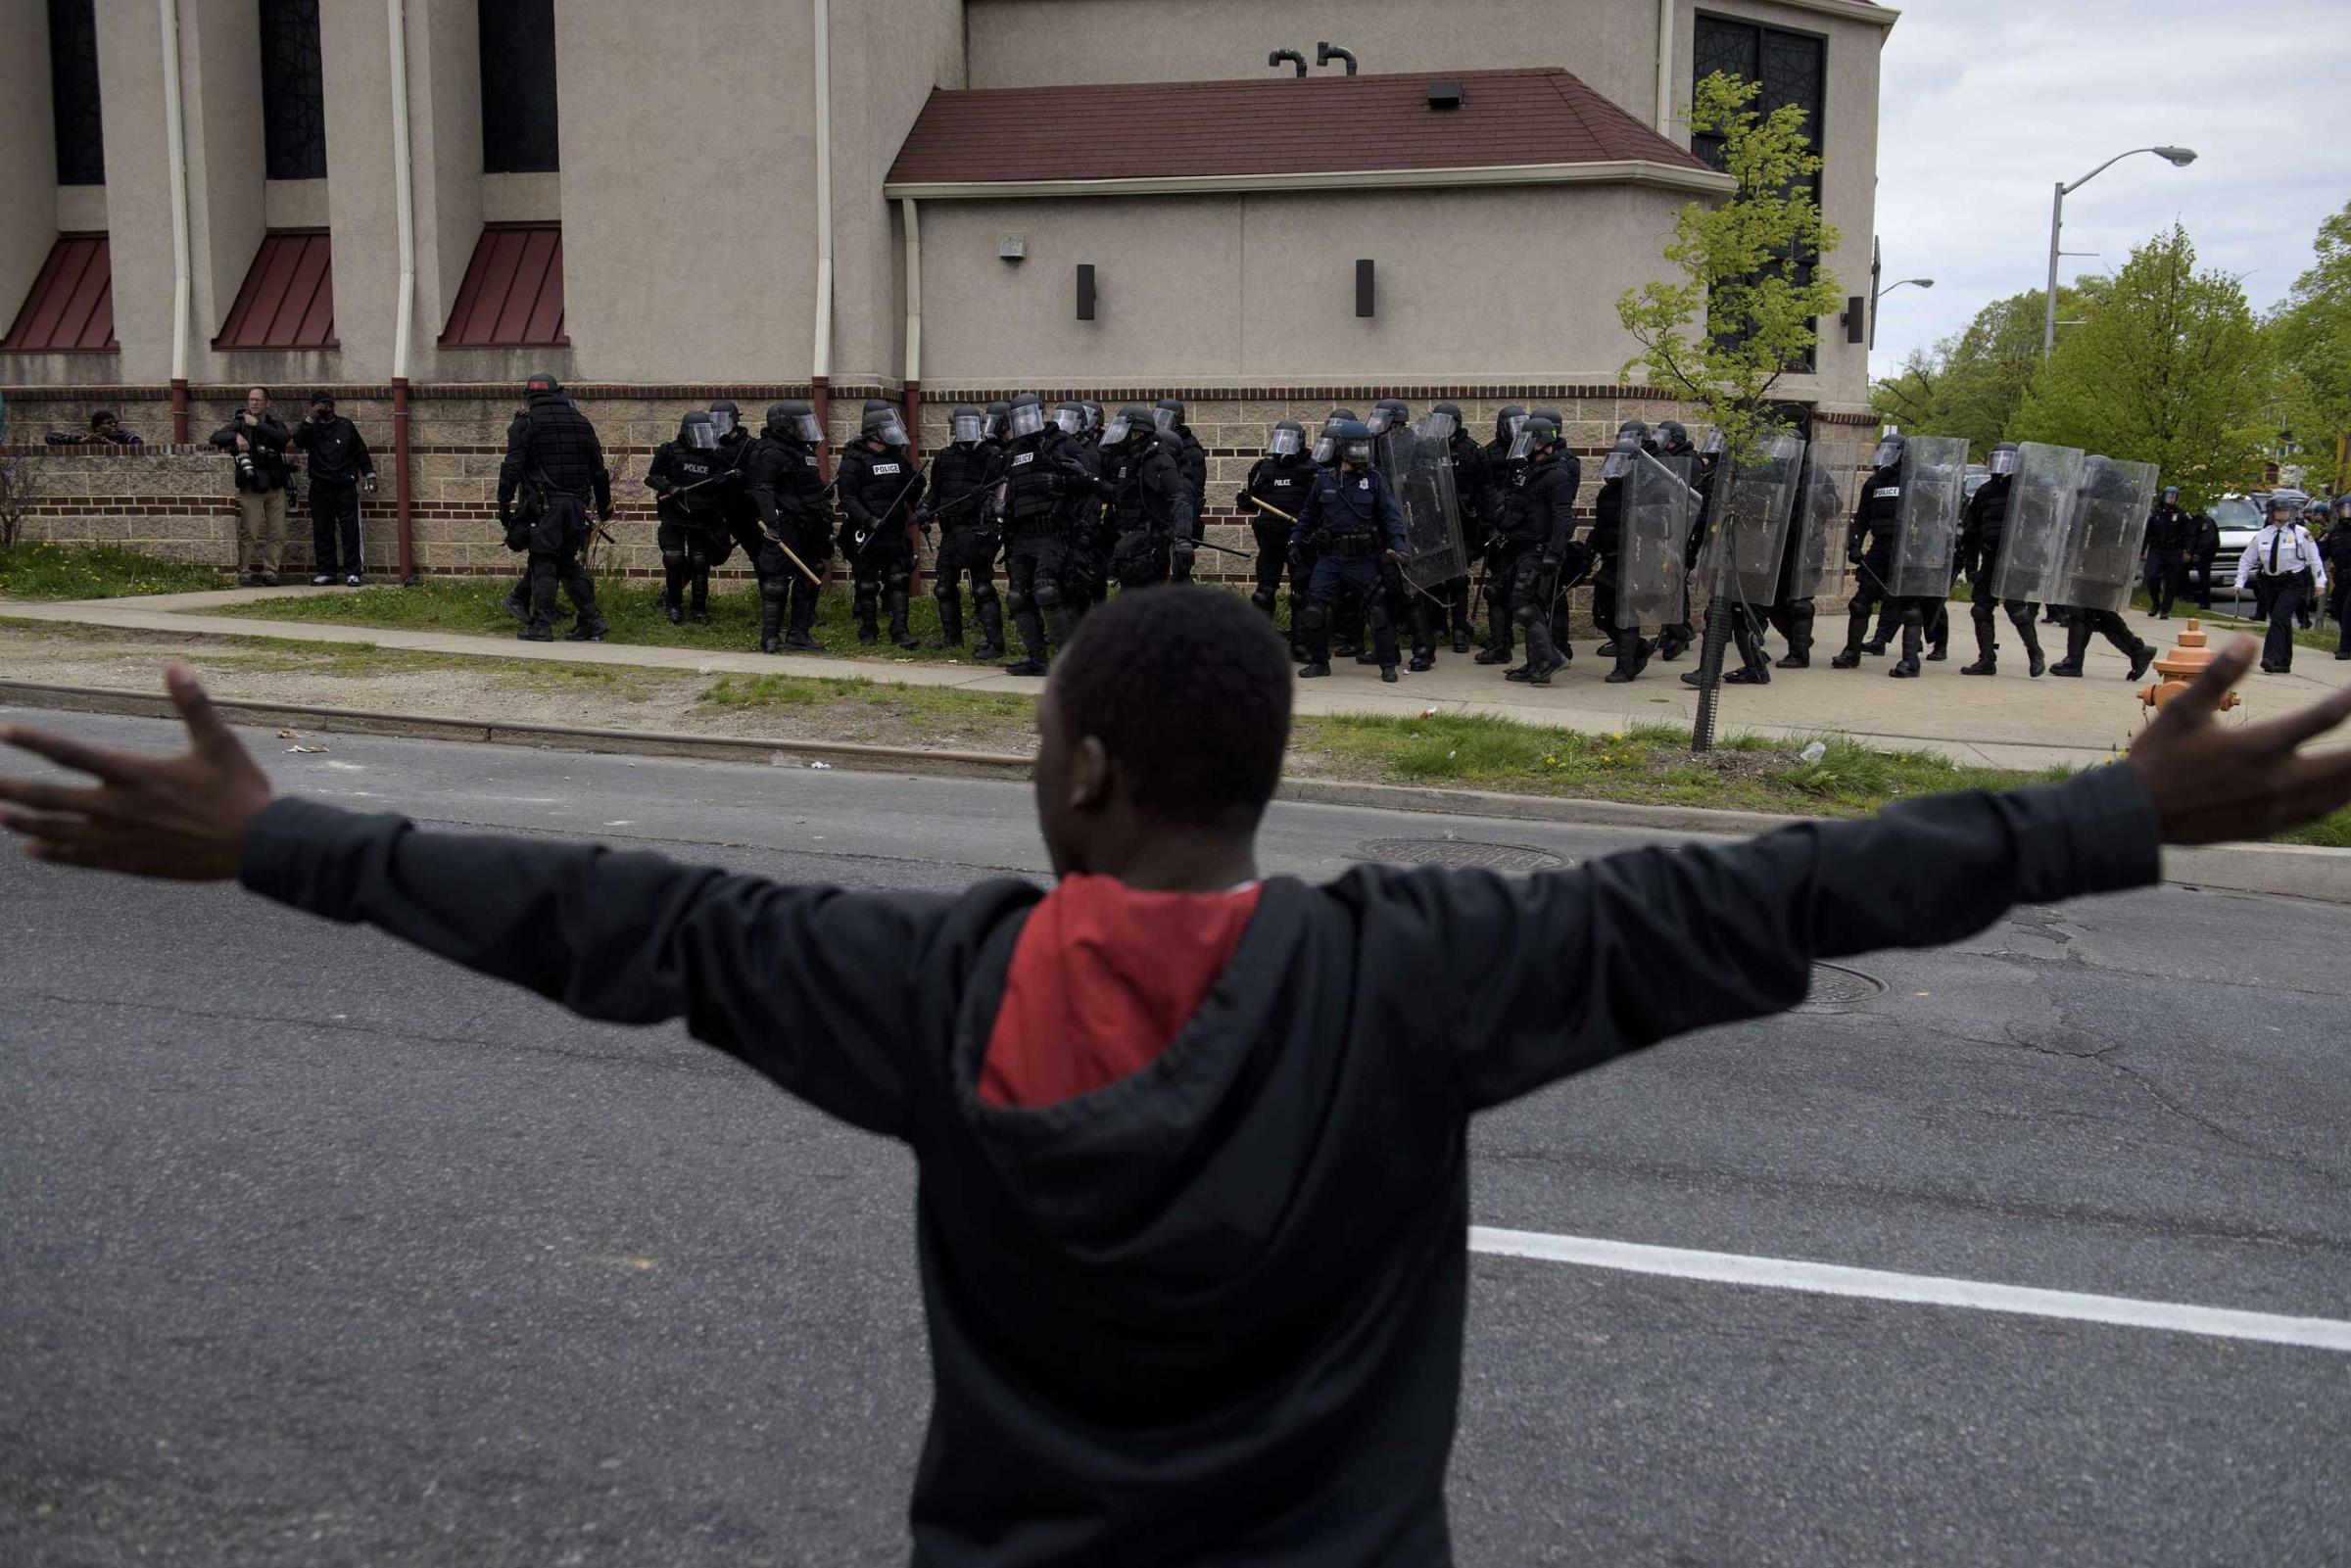 Baltimore police officers form a line in front of protesters near Mondawmin Mall in Baltimore on April 27, 2015.